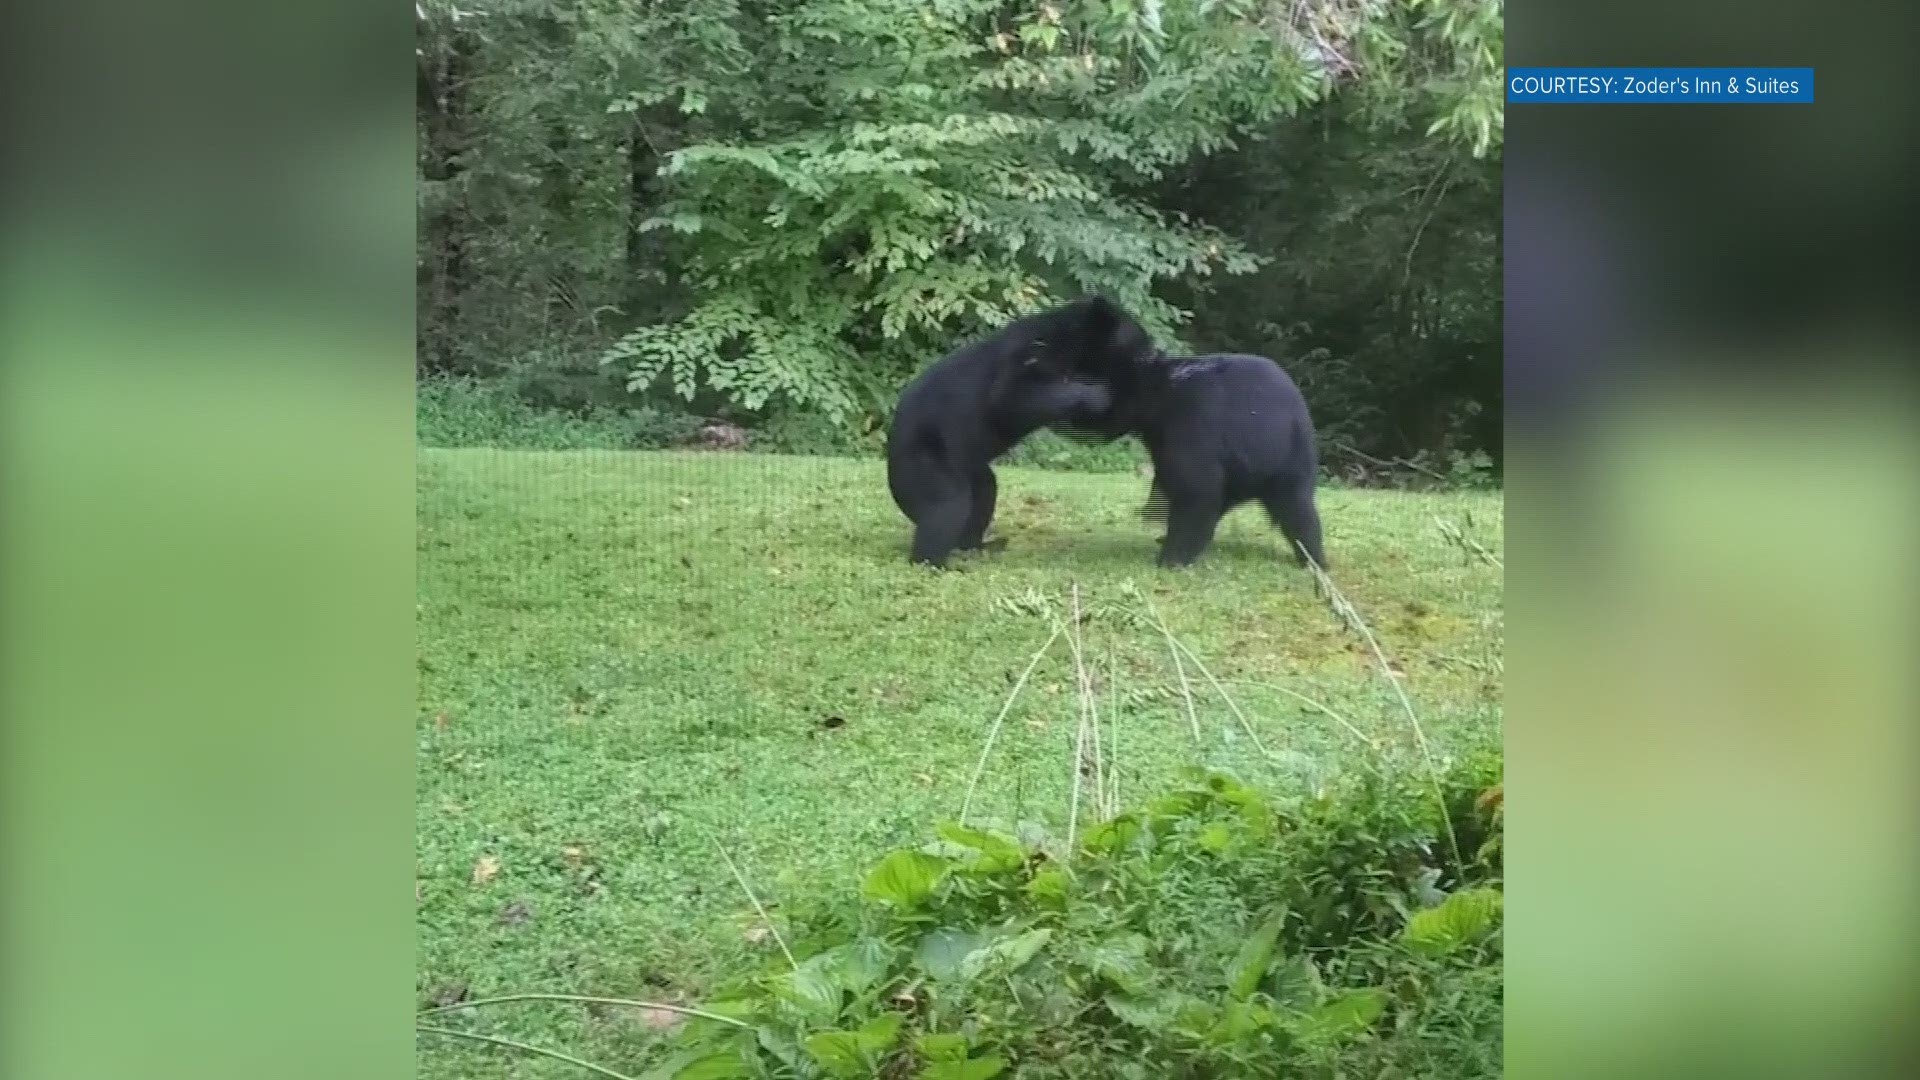 These young adult black bears seem to be practicing to be in the WWE like Knox County Mayor Glenn Jacobs, also known as Kane.